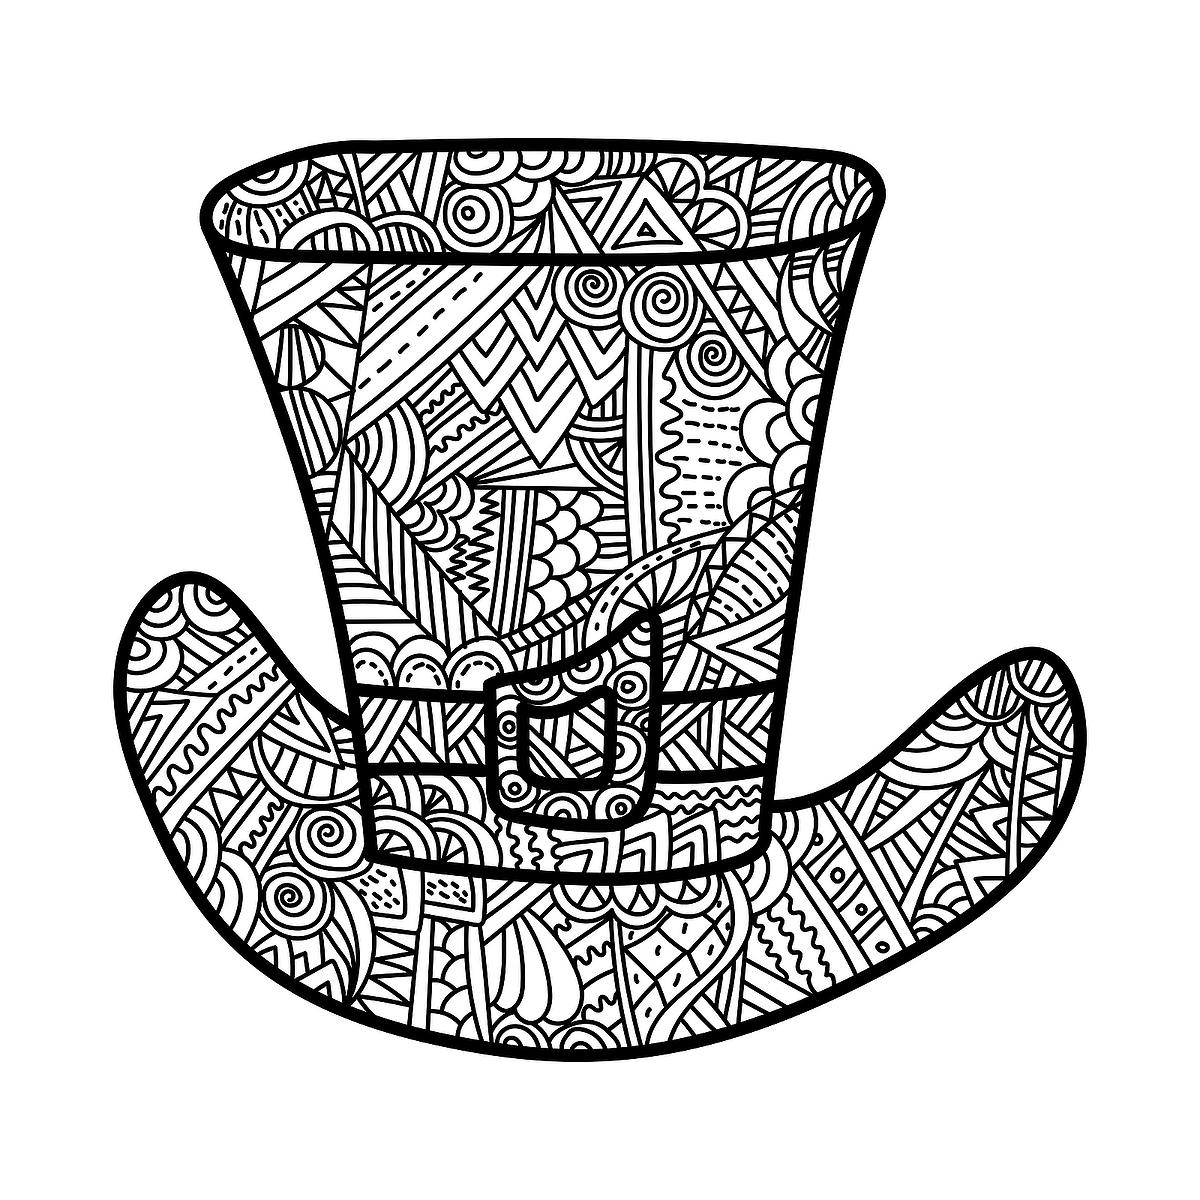 St patricks day coloring pages free printable coloring pages of shamrocks leprechauns more printables mom